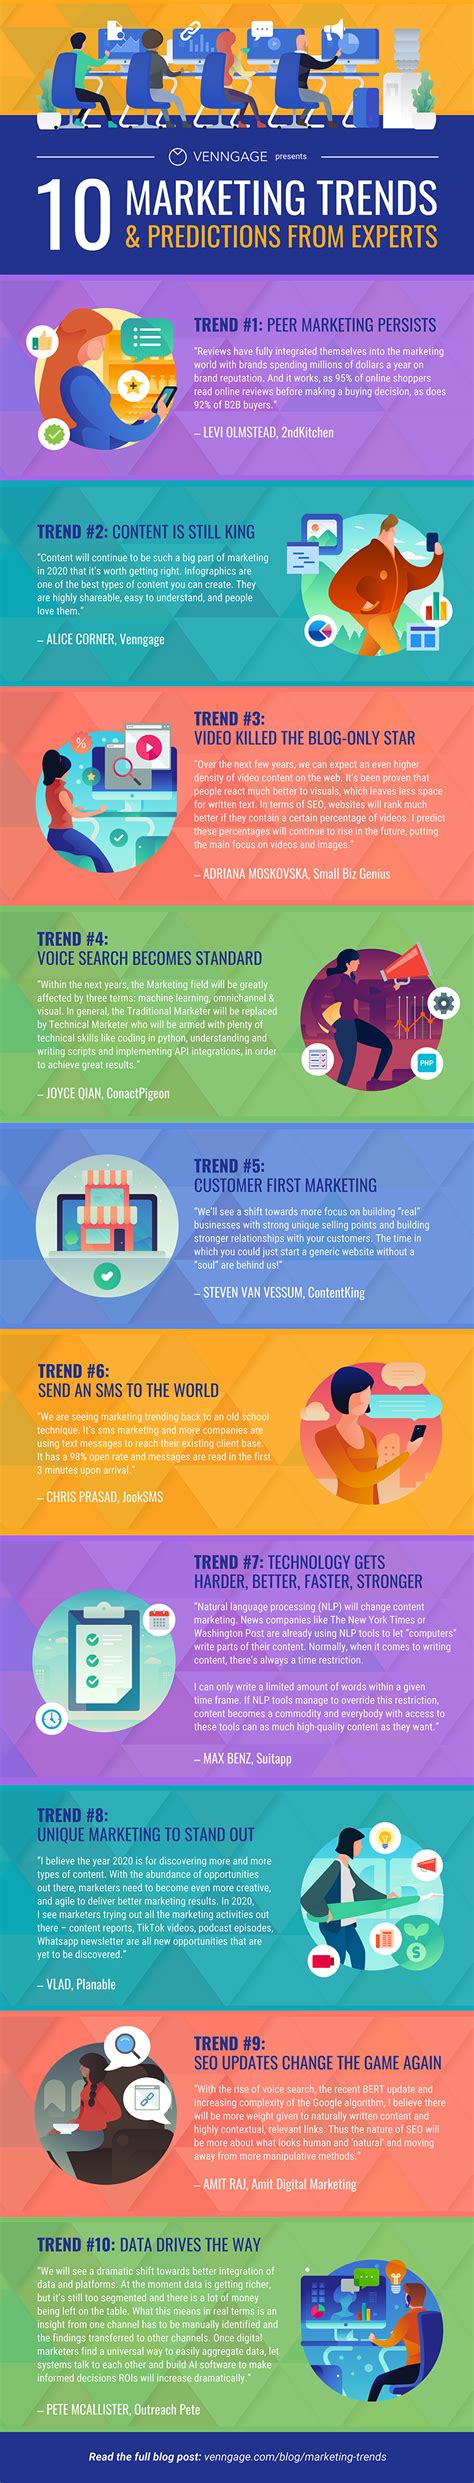 10 Marketing Trends For 2020 Predictions From Experts